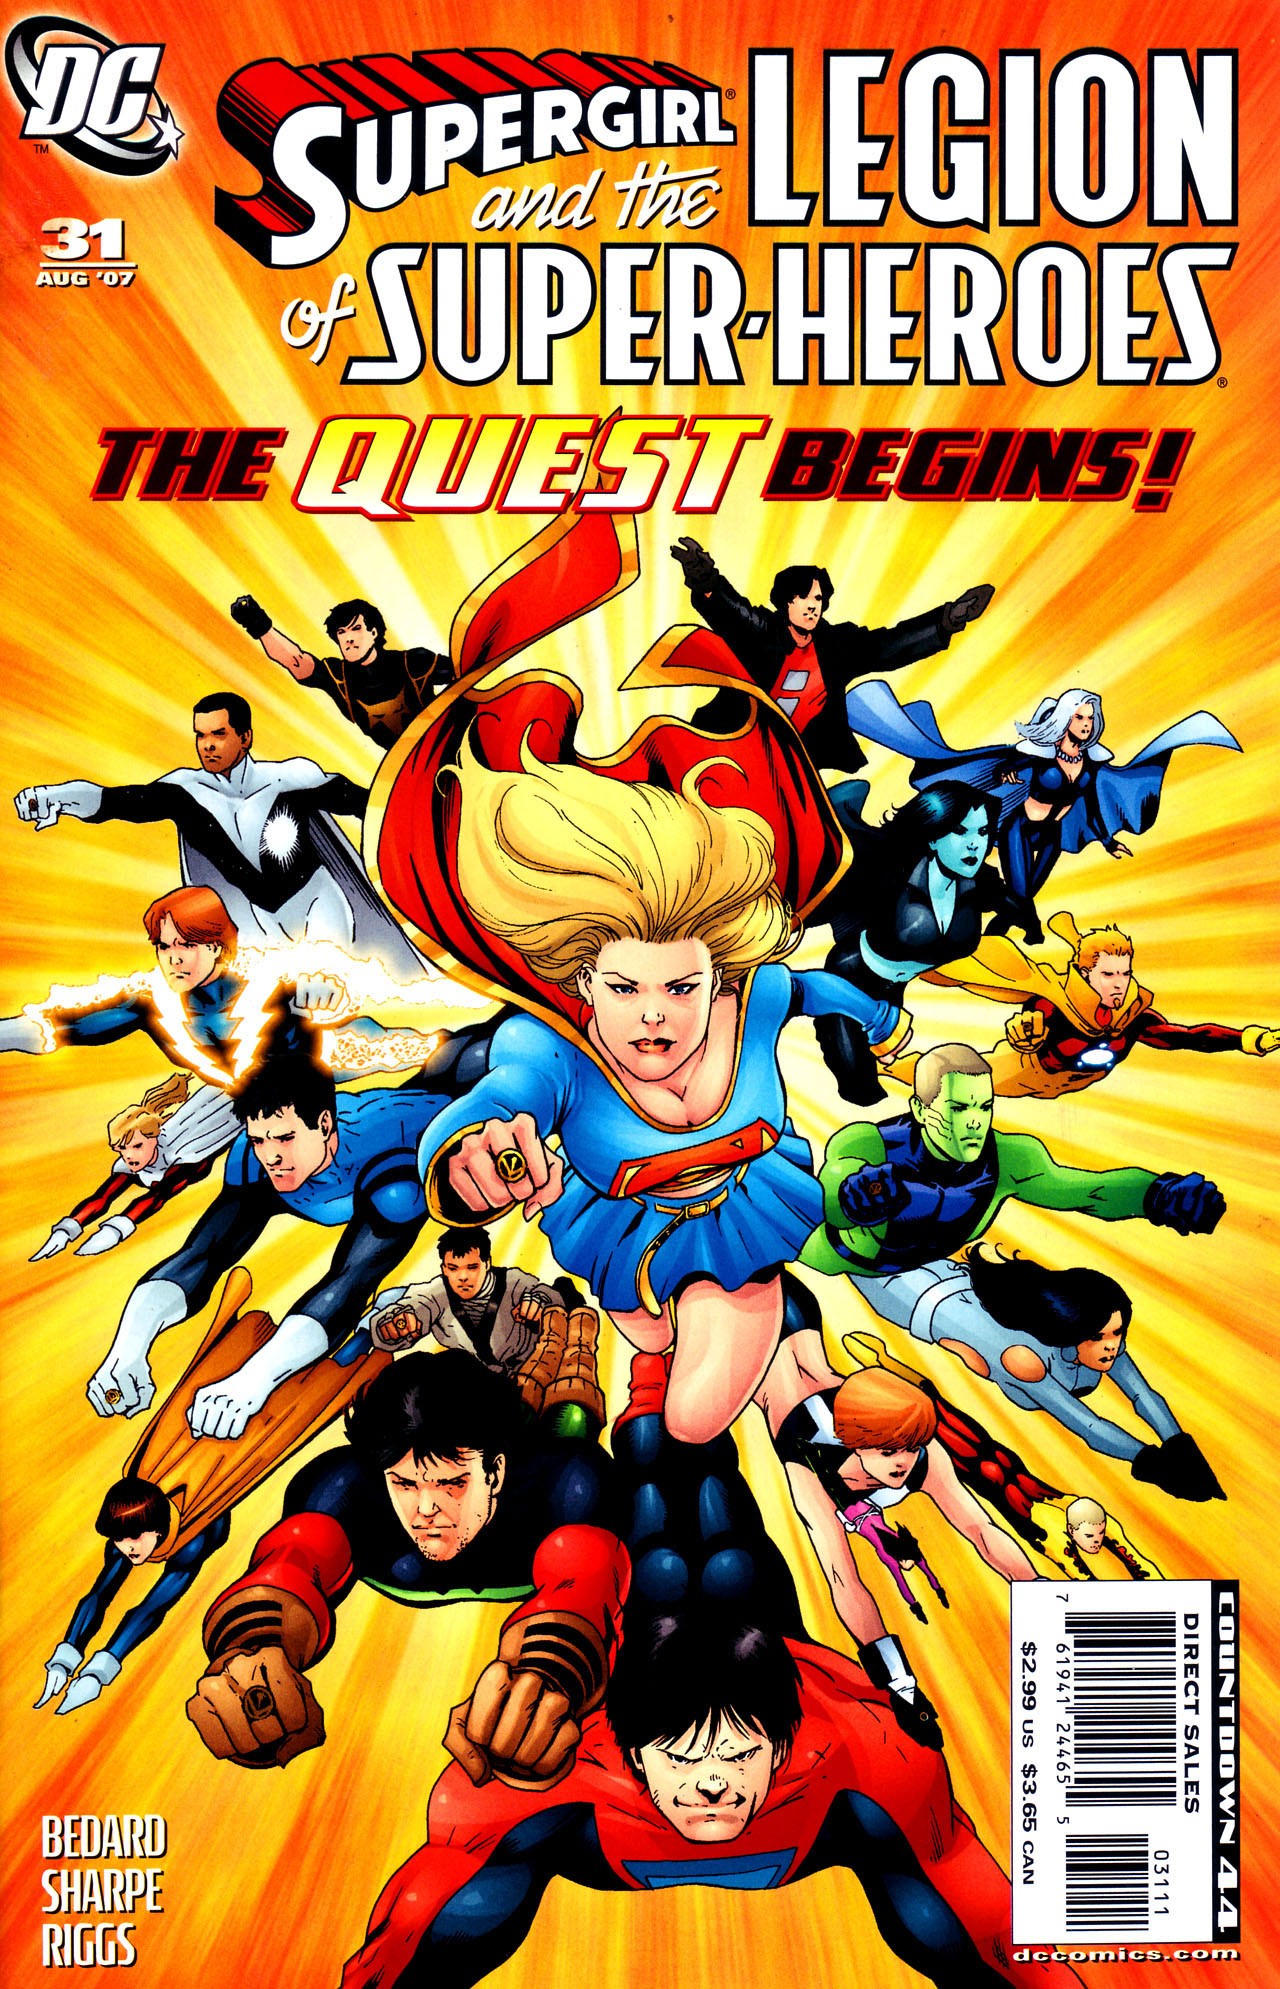 Supergirl and the Legion of Super-Heroes Vol. 1 #31